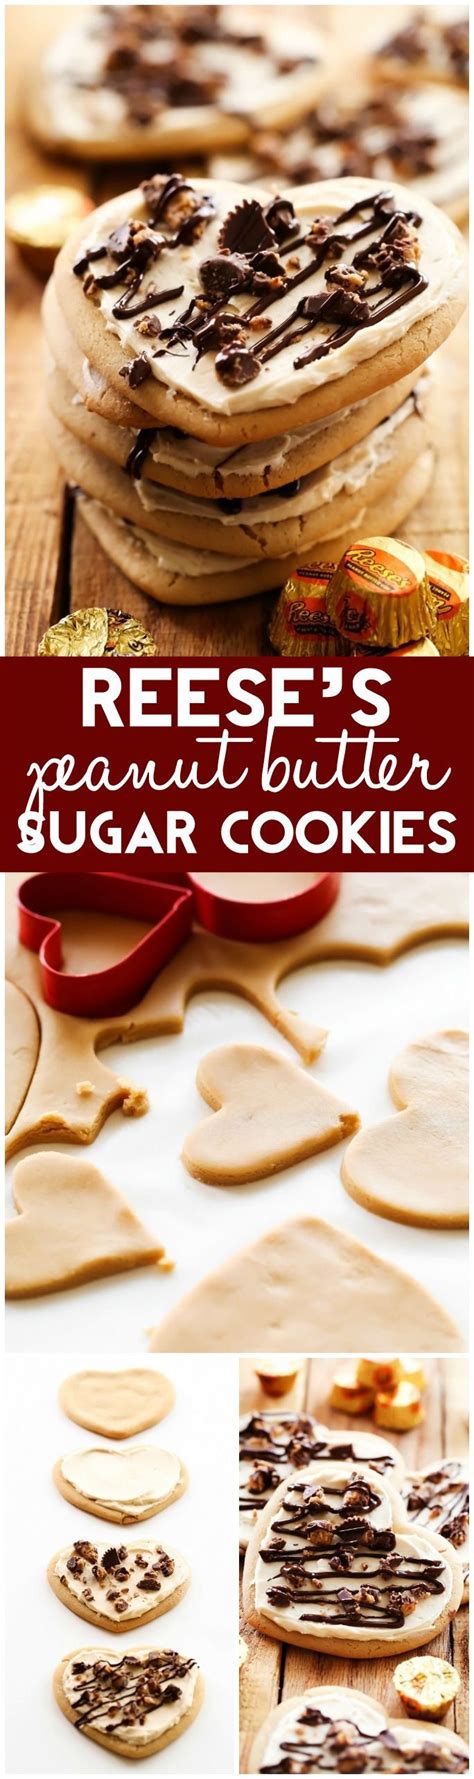 This homemade peanut butter granola bars recipe is so easy! Reese's Peanut Butter Sugar Cookies | Recipe | No bake ...